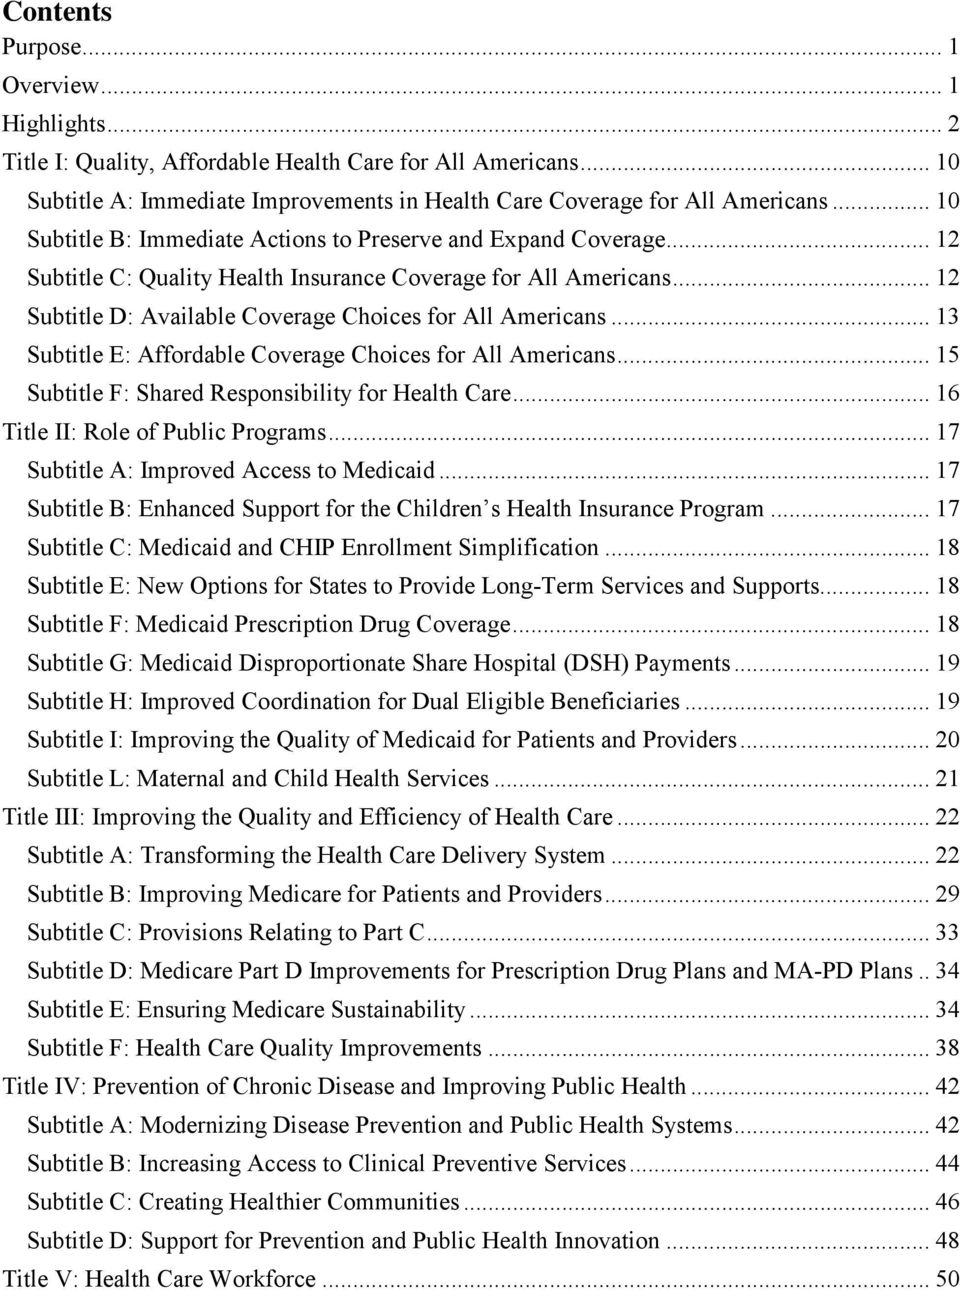 .. 13 Subtitle E: Affordable Coverage Choices for All Americans... 15 Subtitle F: Shared Responsibility for Health Care... 16 Title II: Role of Public Programs.